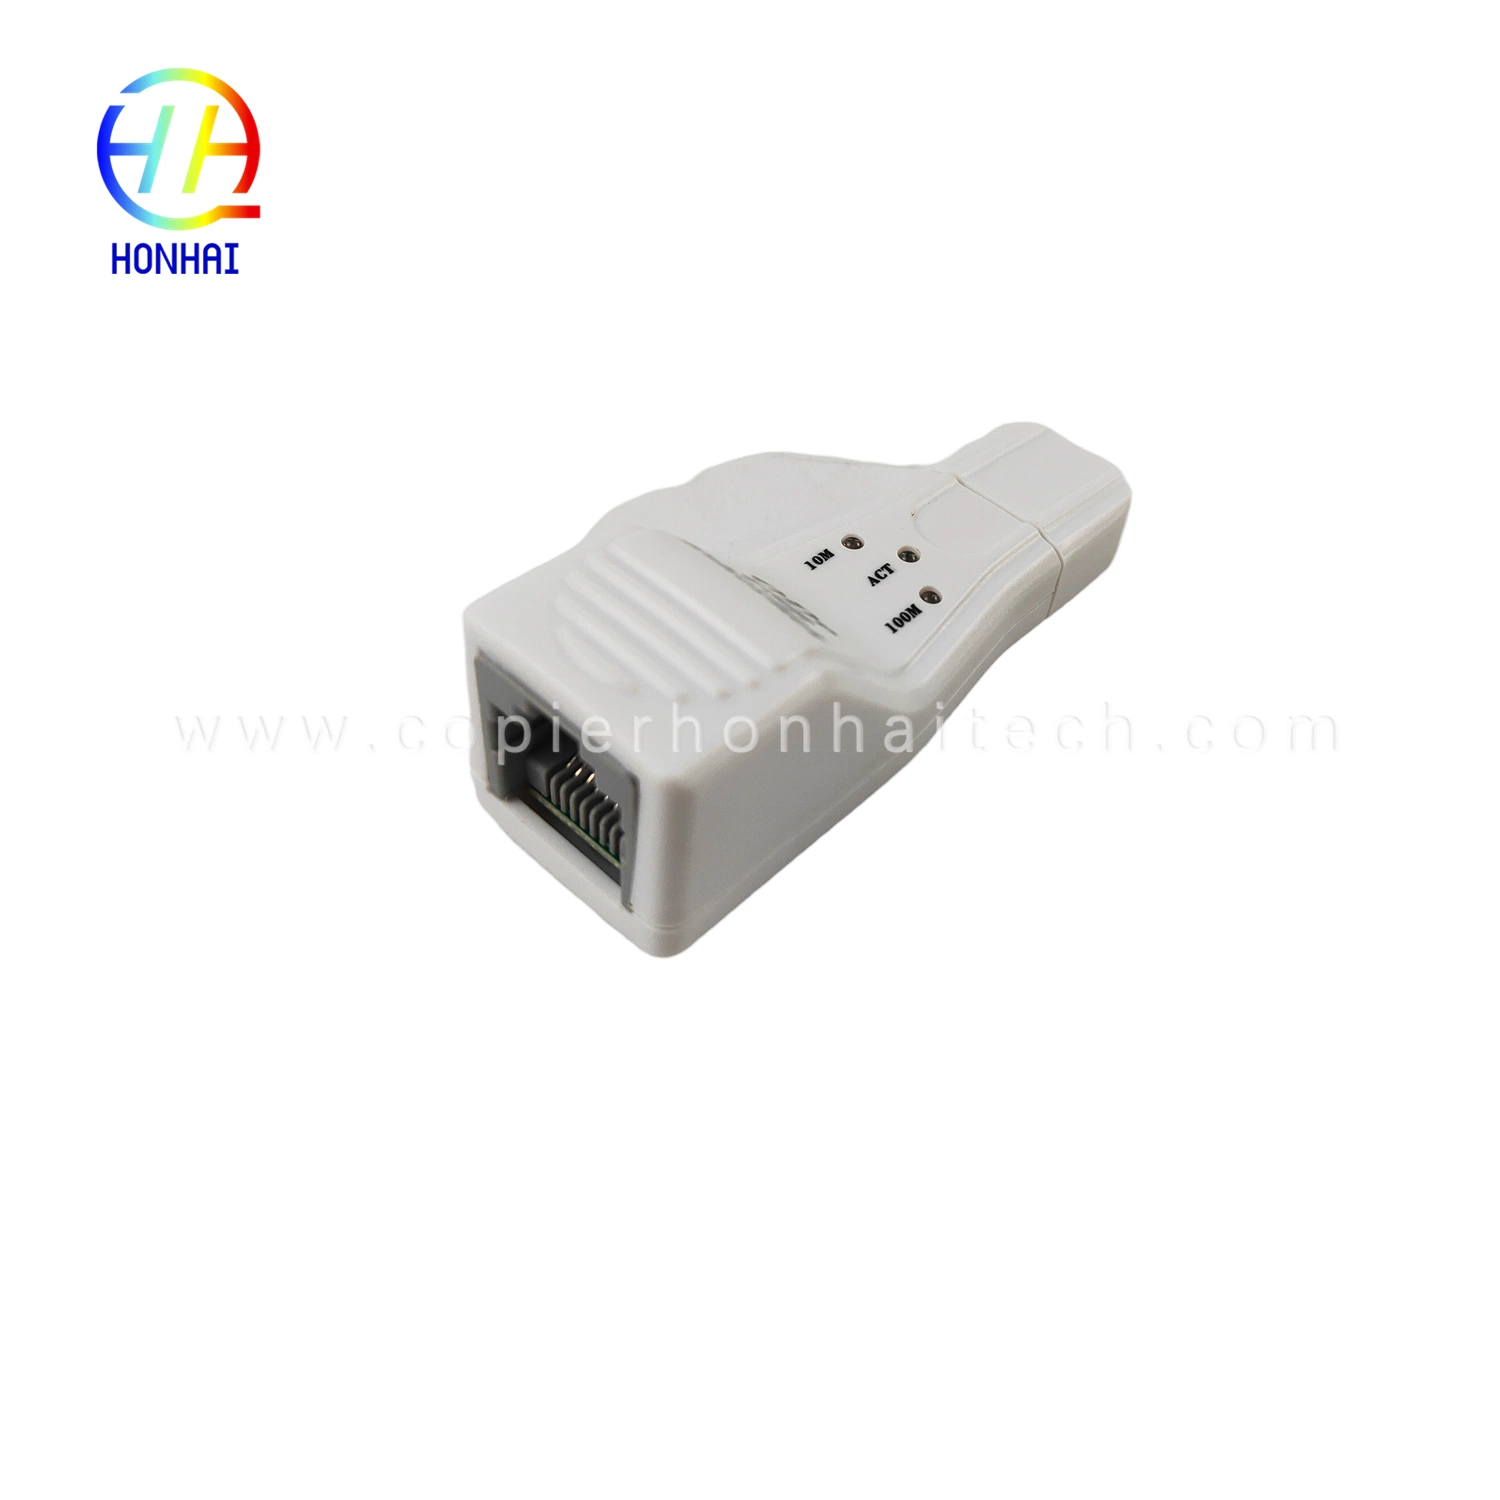 USB Interface for Oce Pw365 TDS600 Pw300 TDS320 400 450 500 600 700 9300 9400 9600